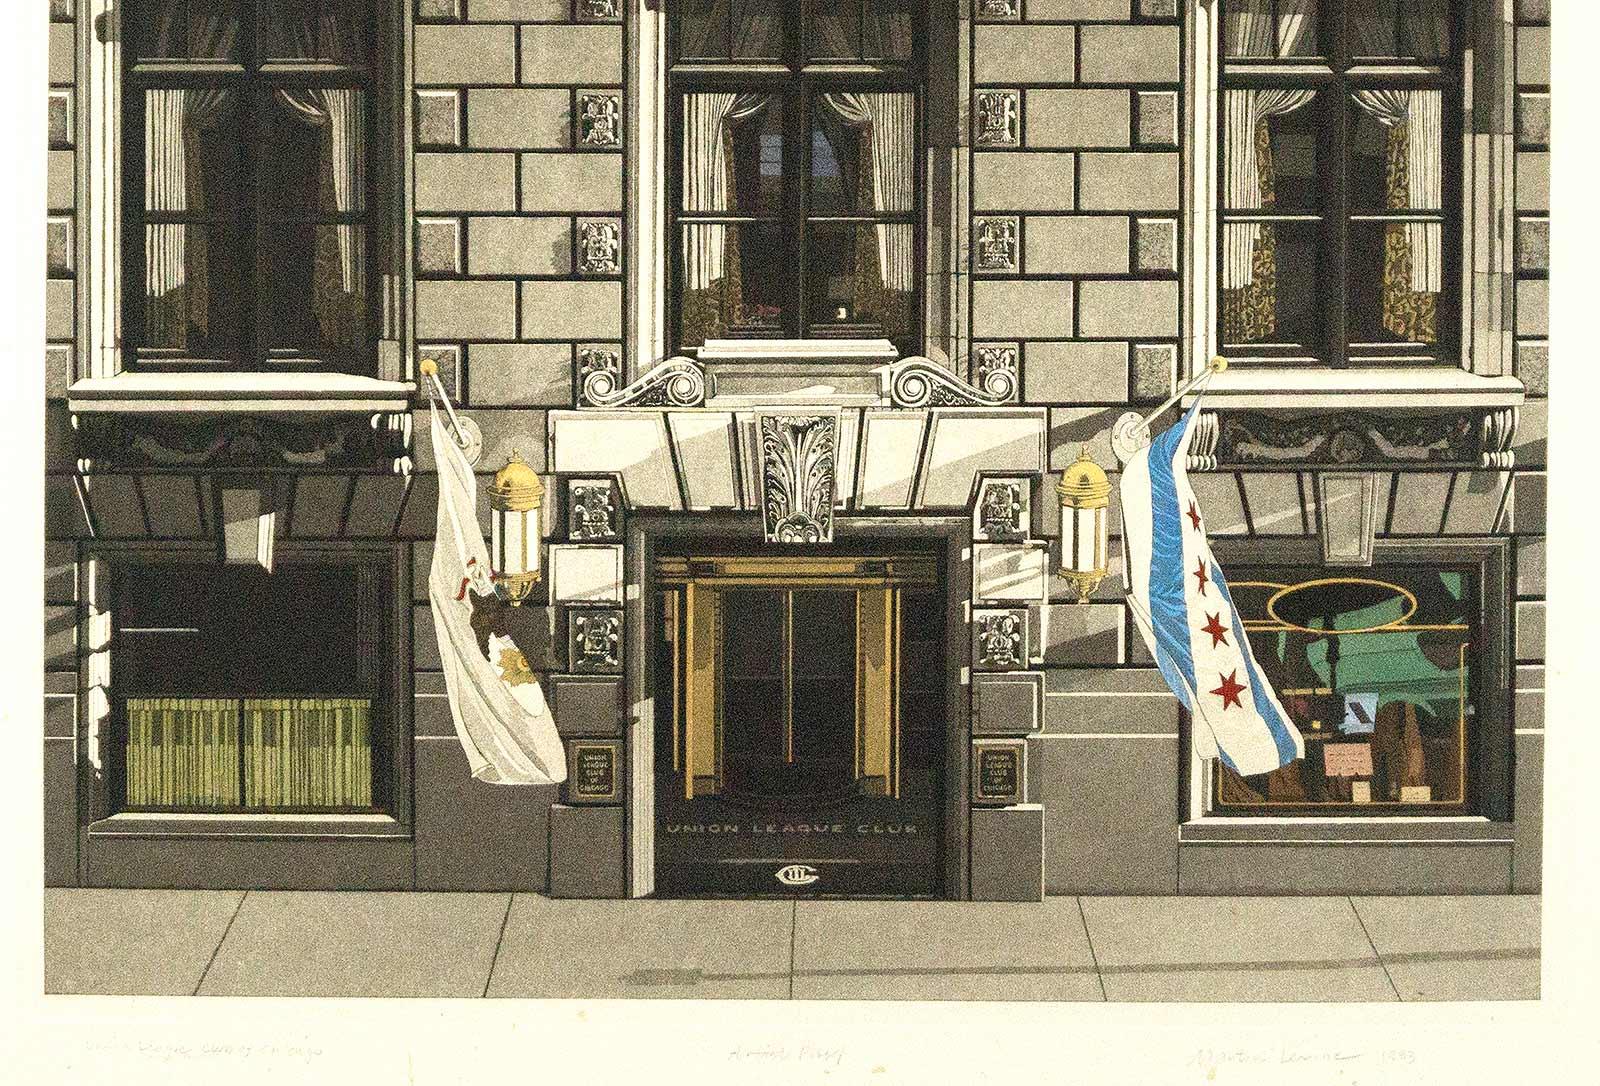 Union League Club of Chicago - Print by Martin Levine